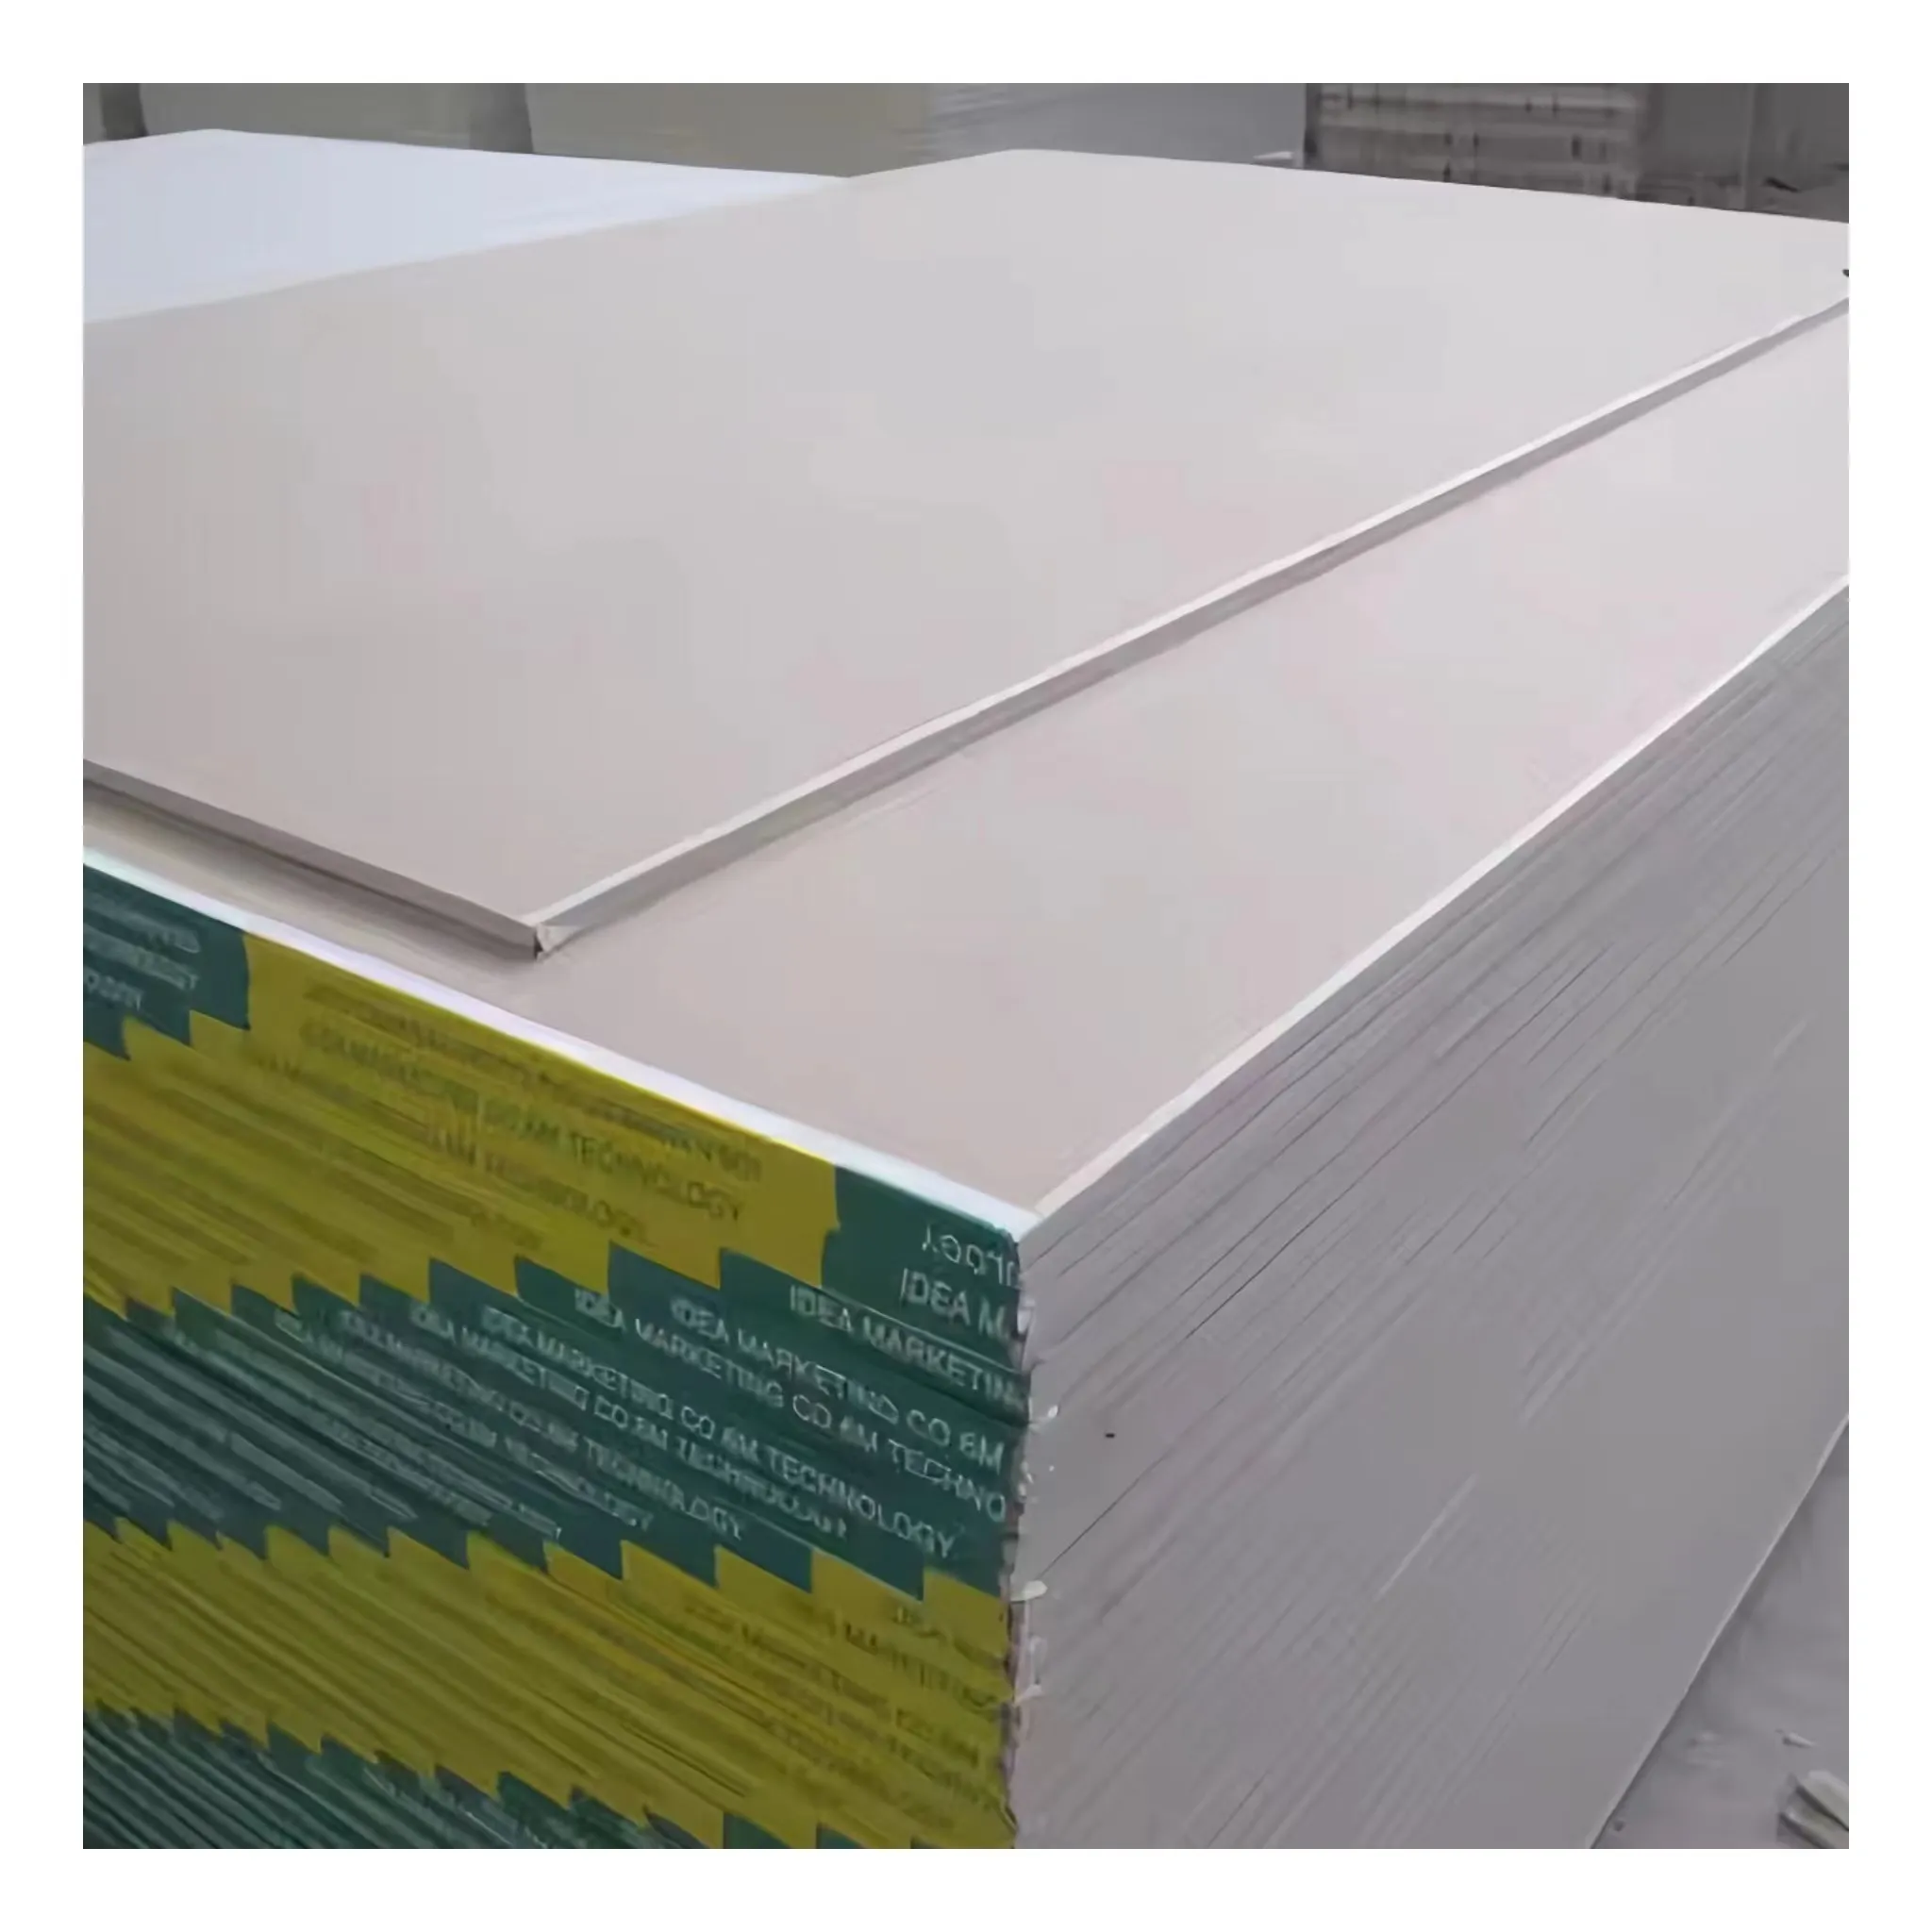 New Type 9.5/12mm Partition Drywall Building Material Cheap Prices Plaster Board Gypsum Boards for drywall and ceiling